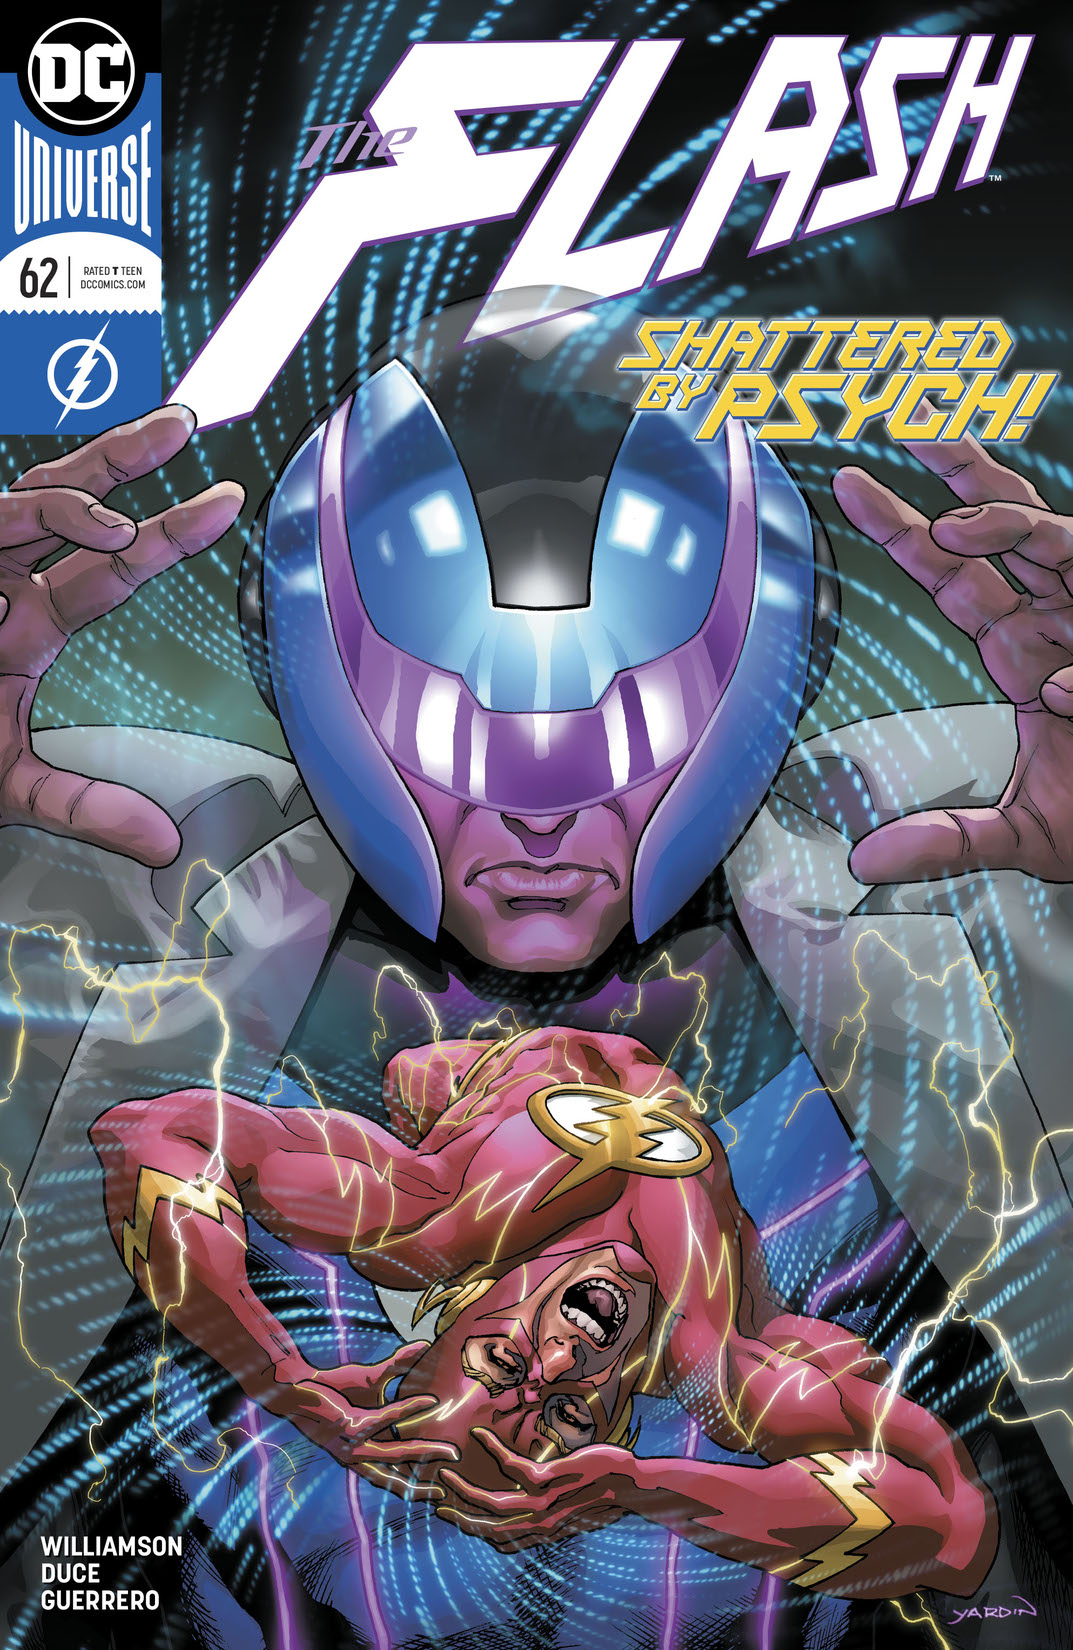 The Flash (2016-) #62 preview images